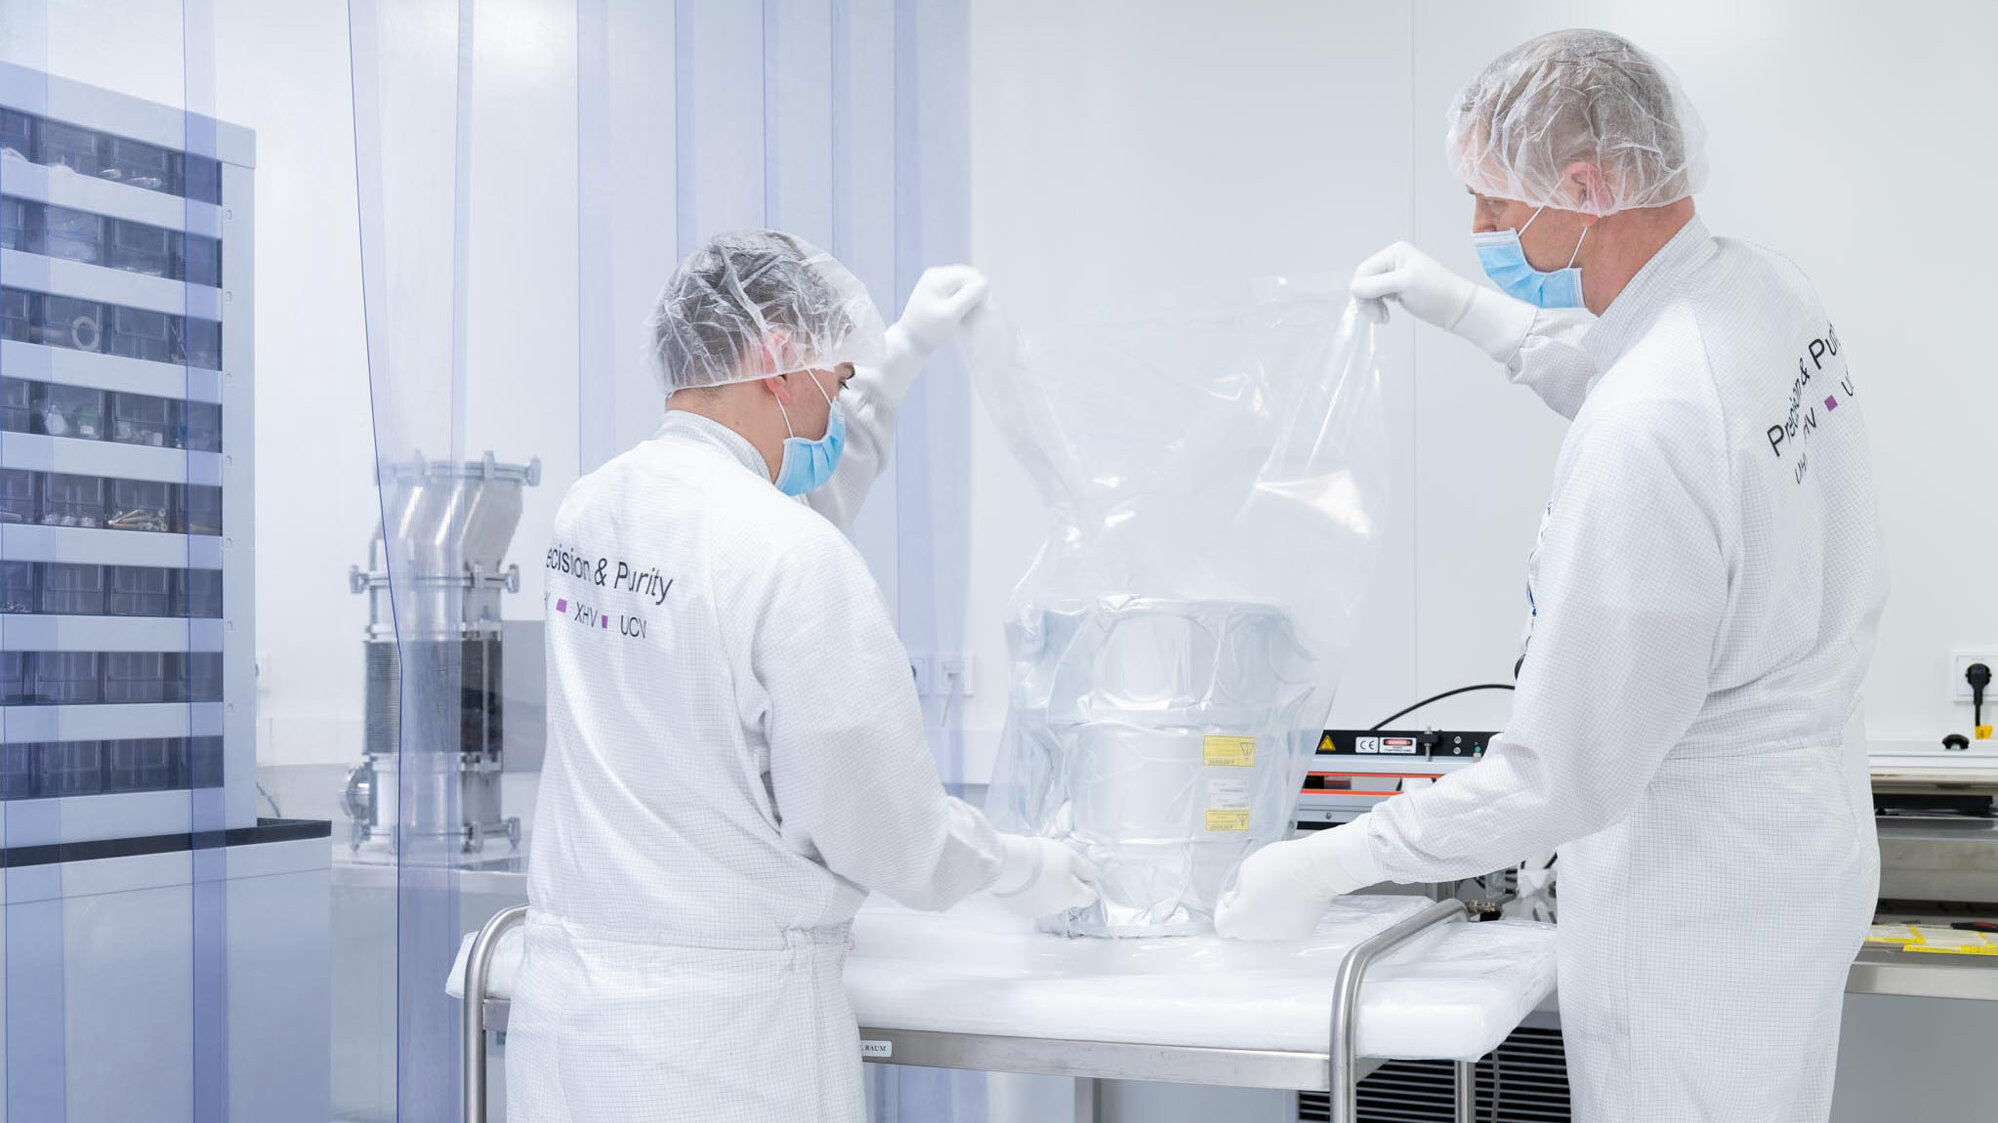 Two employees pack components under cleanroom conditions